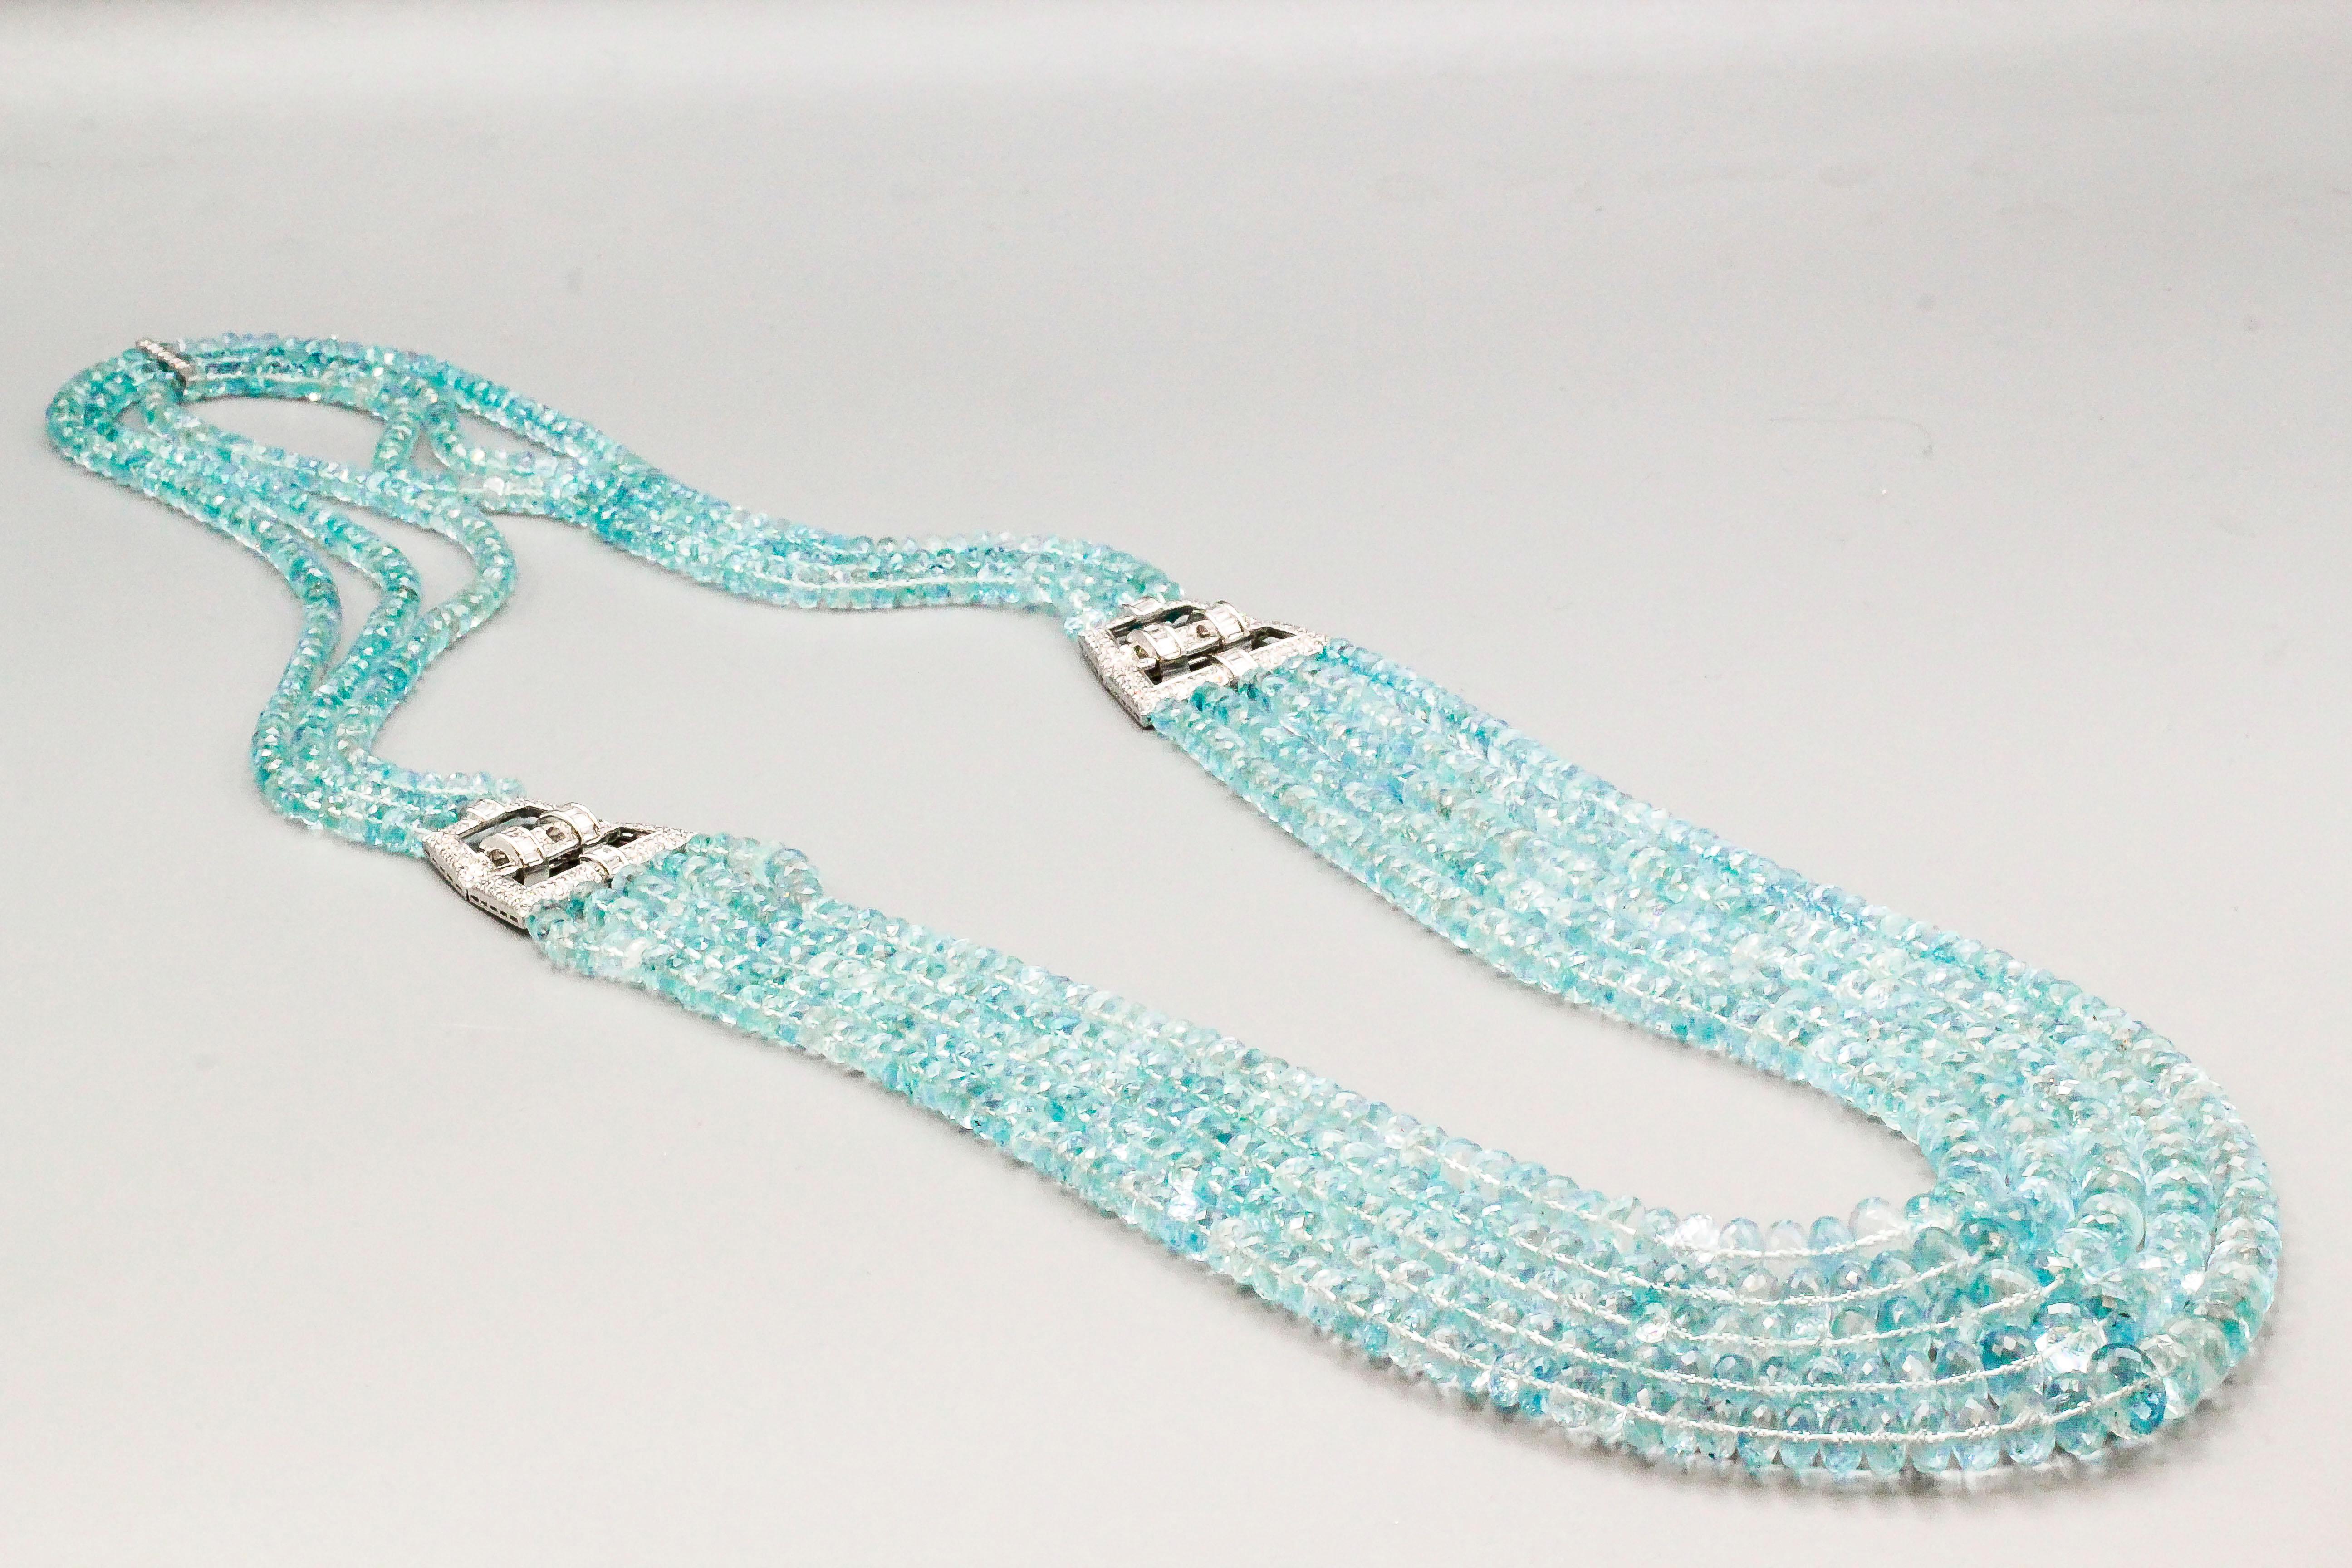 Impressive multi-strand faceted aquamarine bead necklace with 18k white gold and diamond accents, circa 1970s. It features approx. 1100 cts of aquamarines and approx. 3cts of high grade round and baguette cut diamonds. This necklace is further